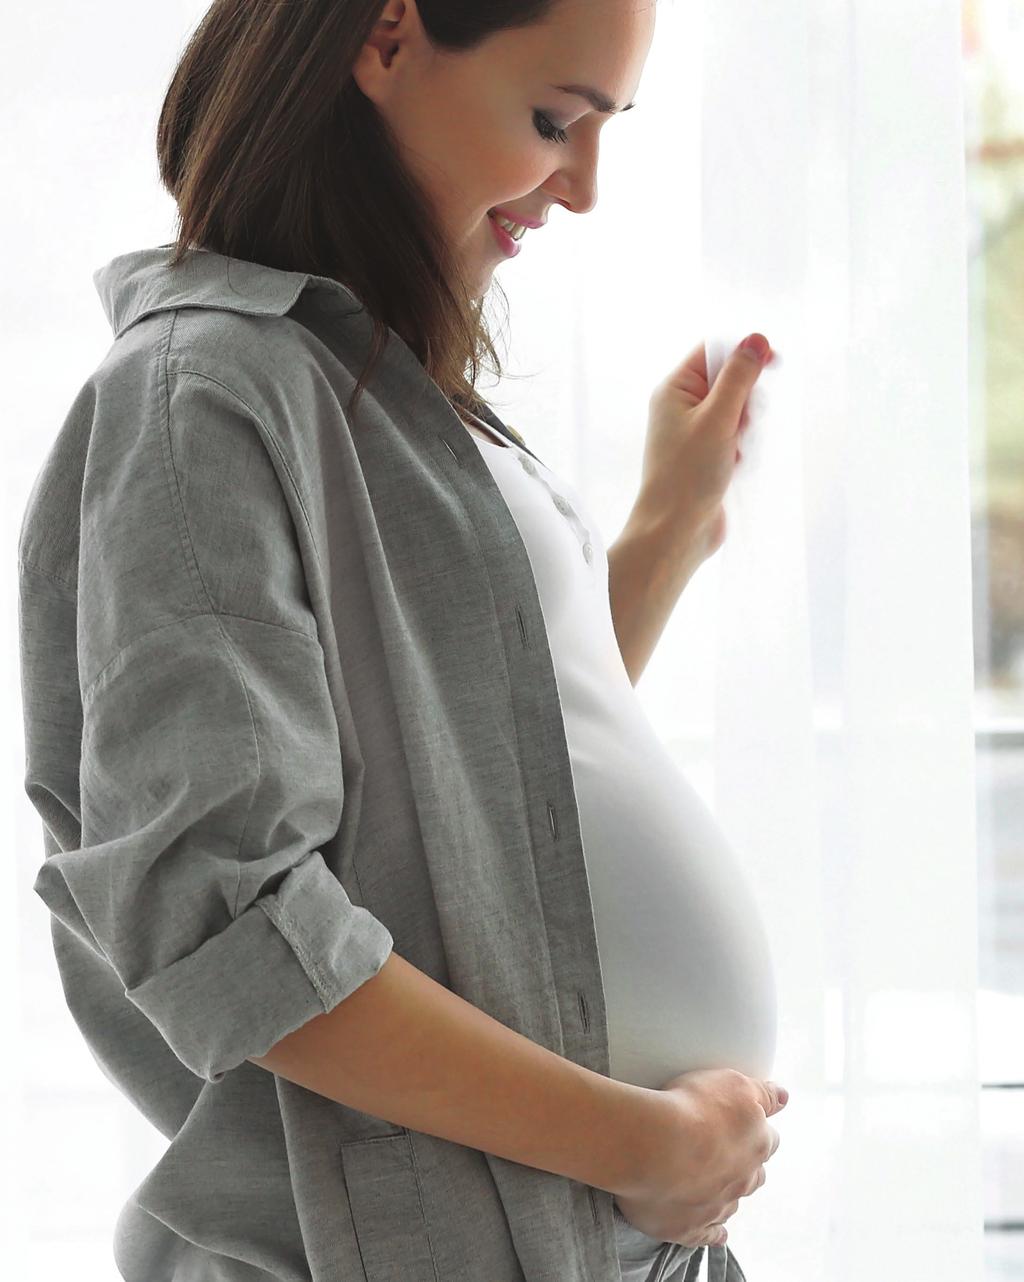 CARE for mom and baby MERCY S PERINATAL CENTER OF IOWA Mercy s Perinatal Center of Iowa (PCI) offers a complete spectrum of perinatal services, including case management for high-risk pregnancies,